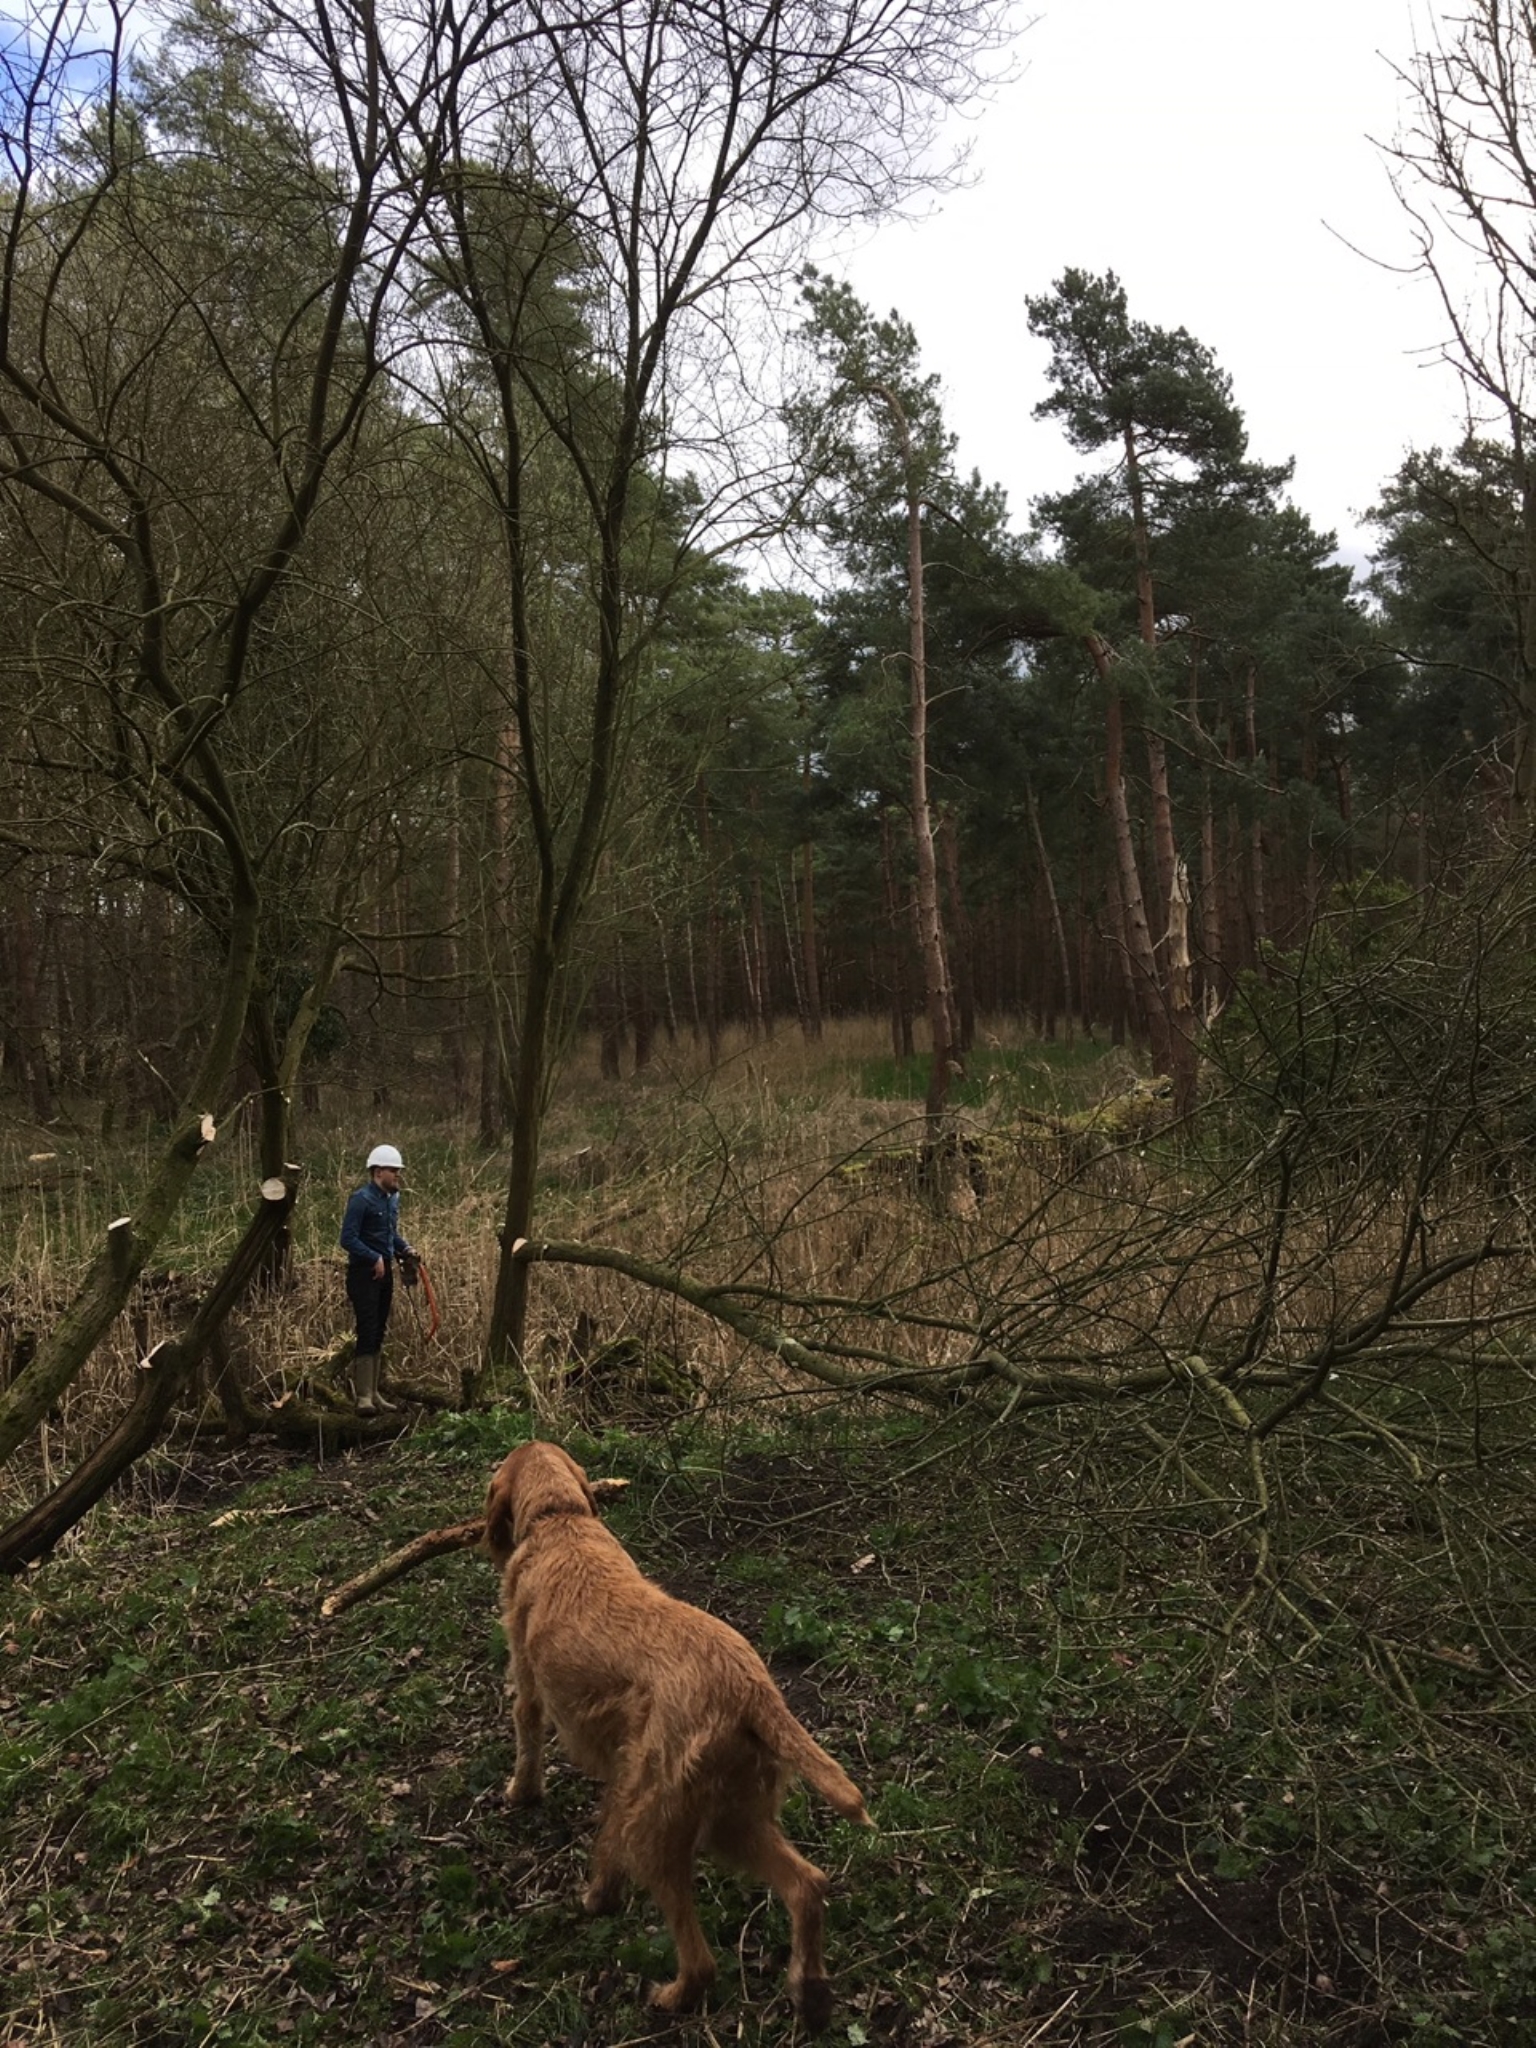 A photo from the FoTF Conservation Event - March 2019 - Clearance work around, and in, the ponds at Harling Woods, Harling : A dog watches over the volunteers